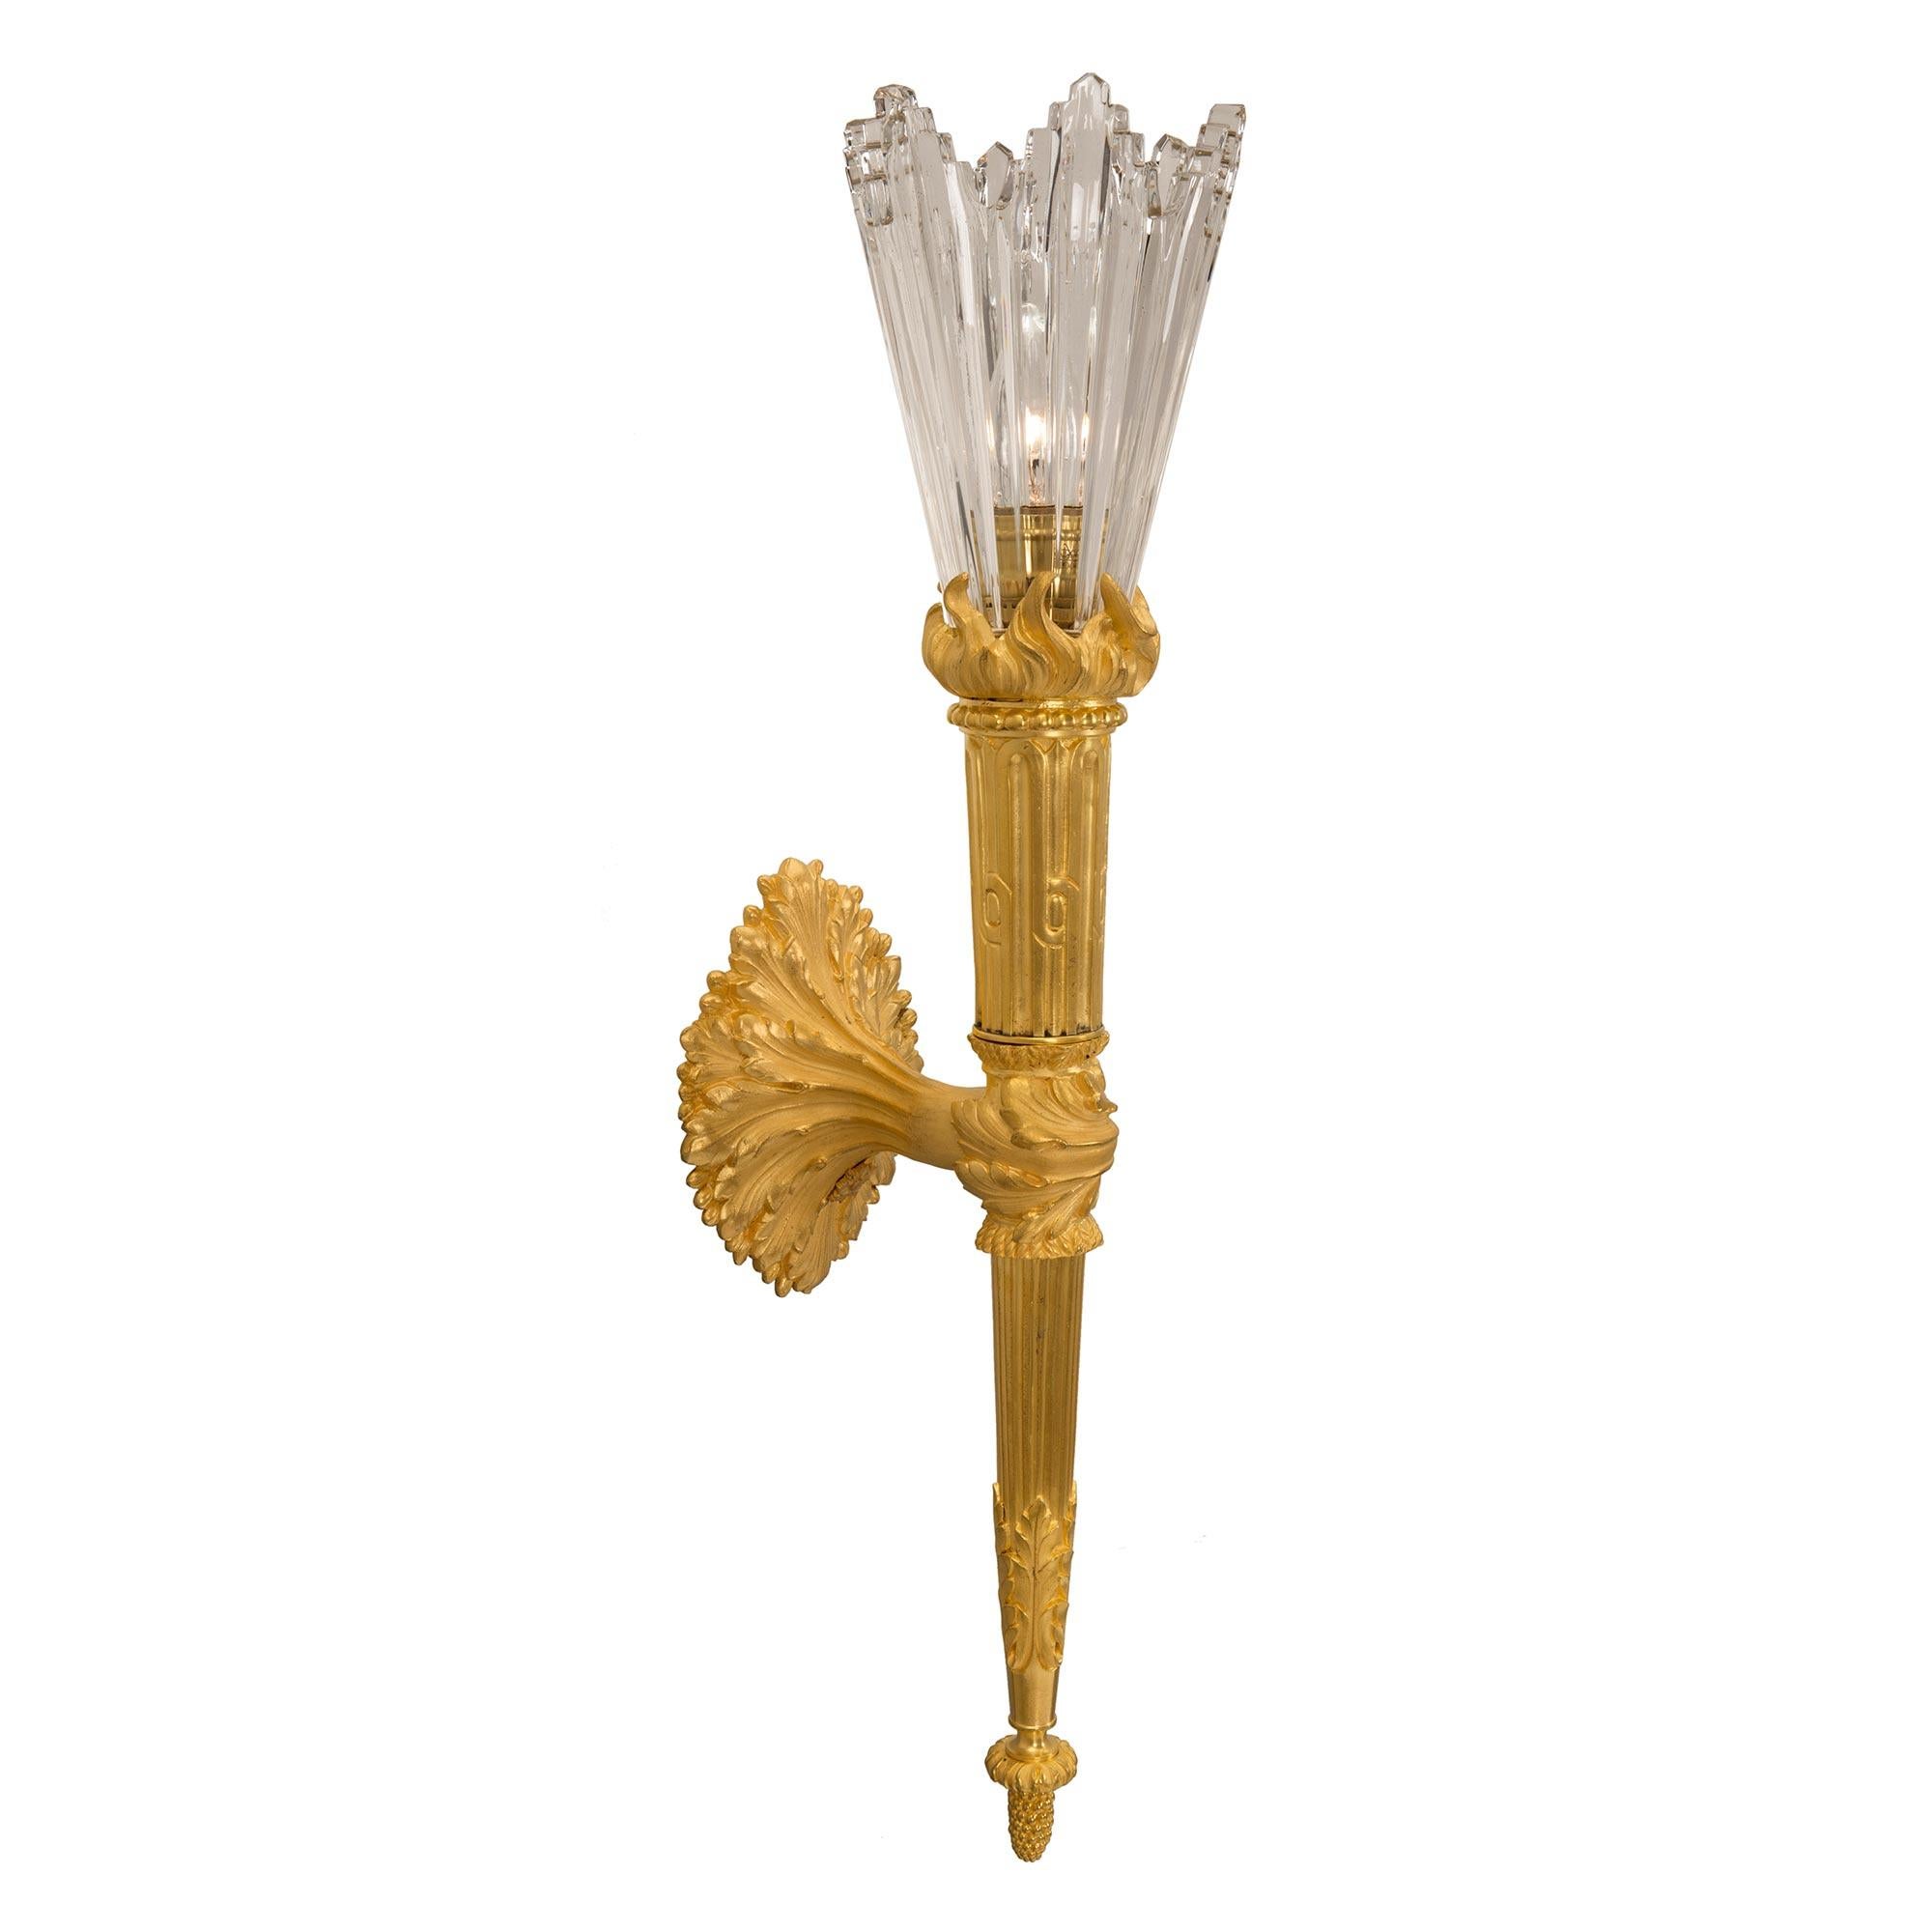 An exceptional and most unique true pair of French 19th century Louis XVI st. ormolu and Baccarat crystal sconces. Each sconce is centered by a fine inverted bottom acorn finial below the elegant tapered fluted central support. The support displays